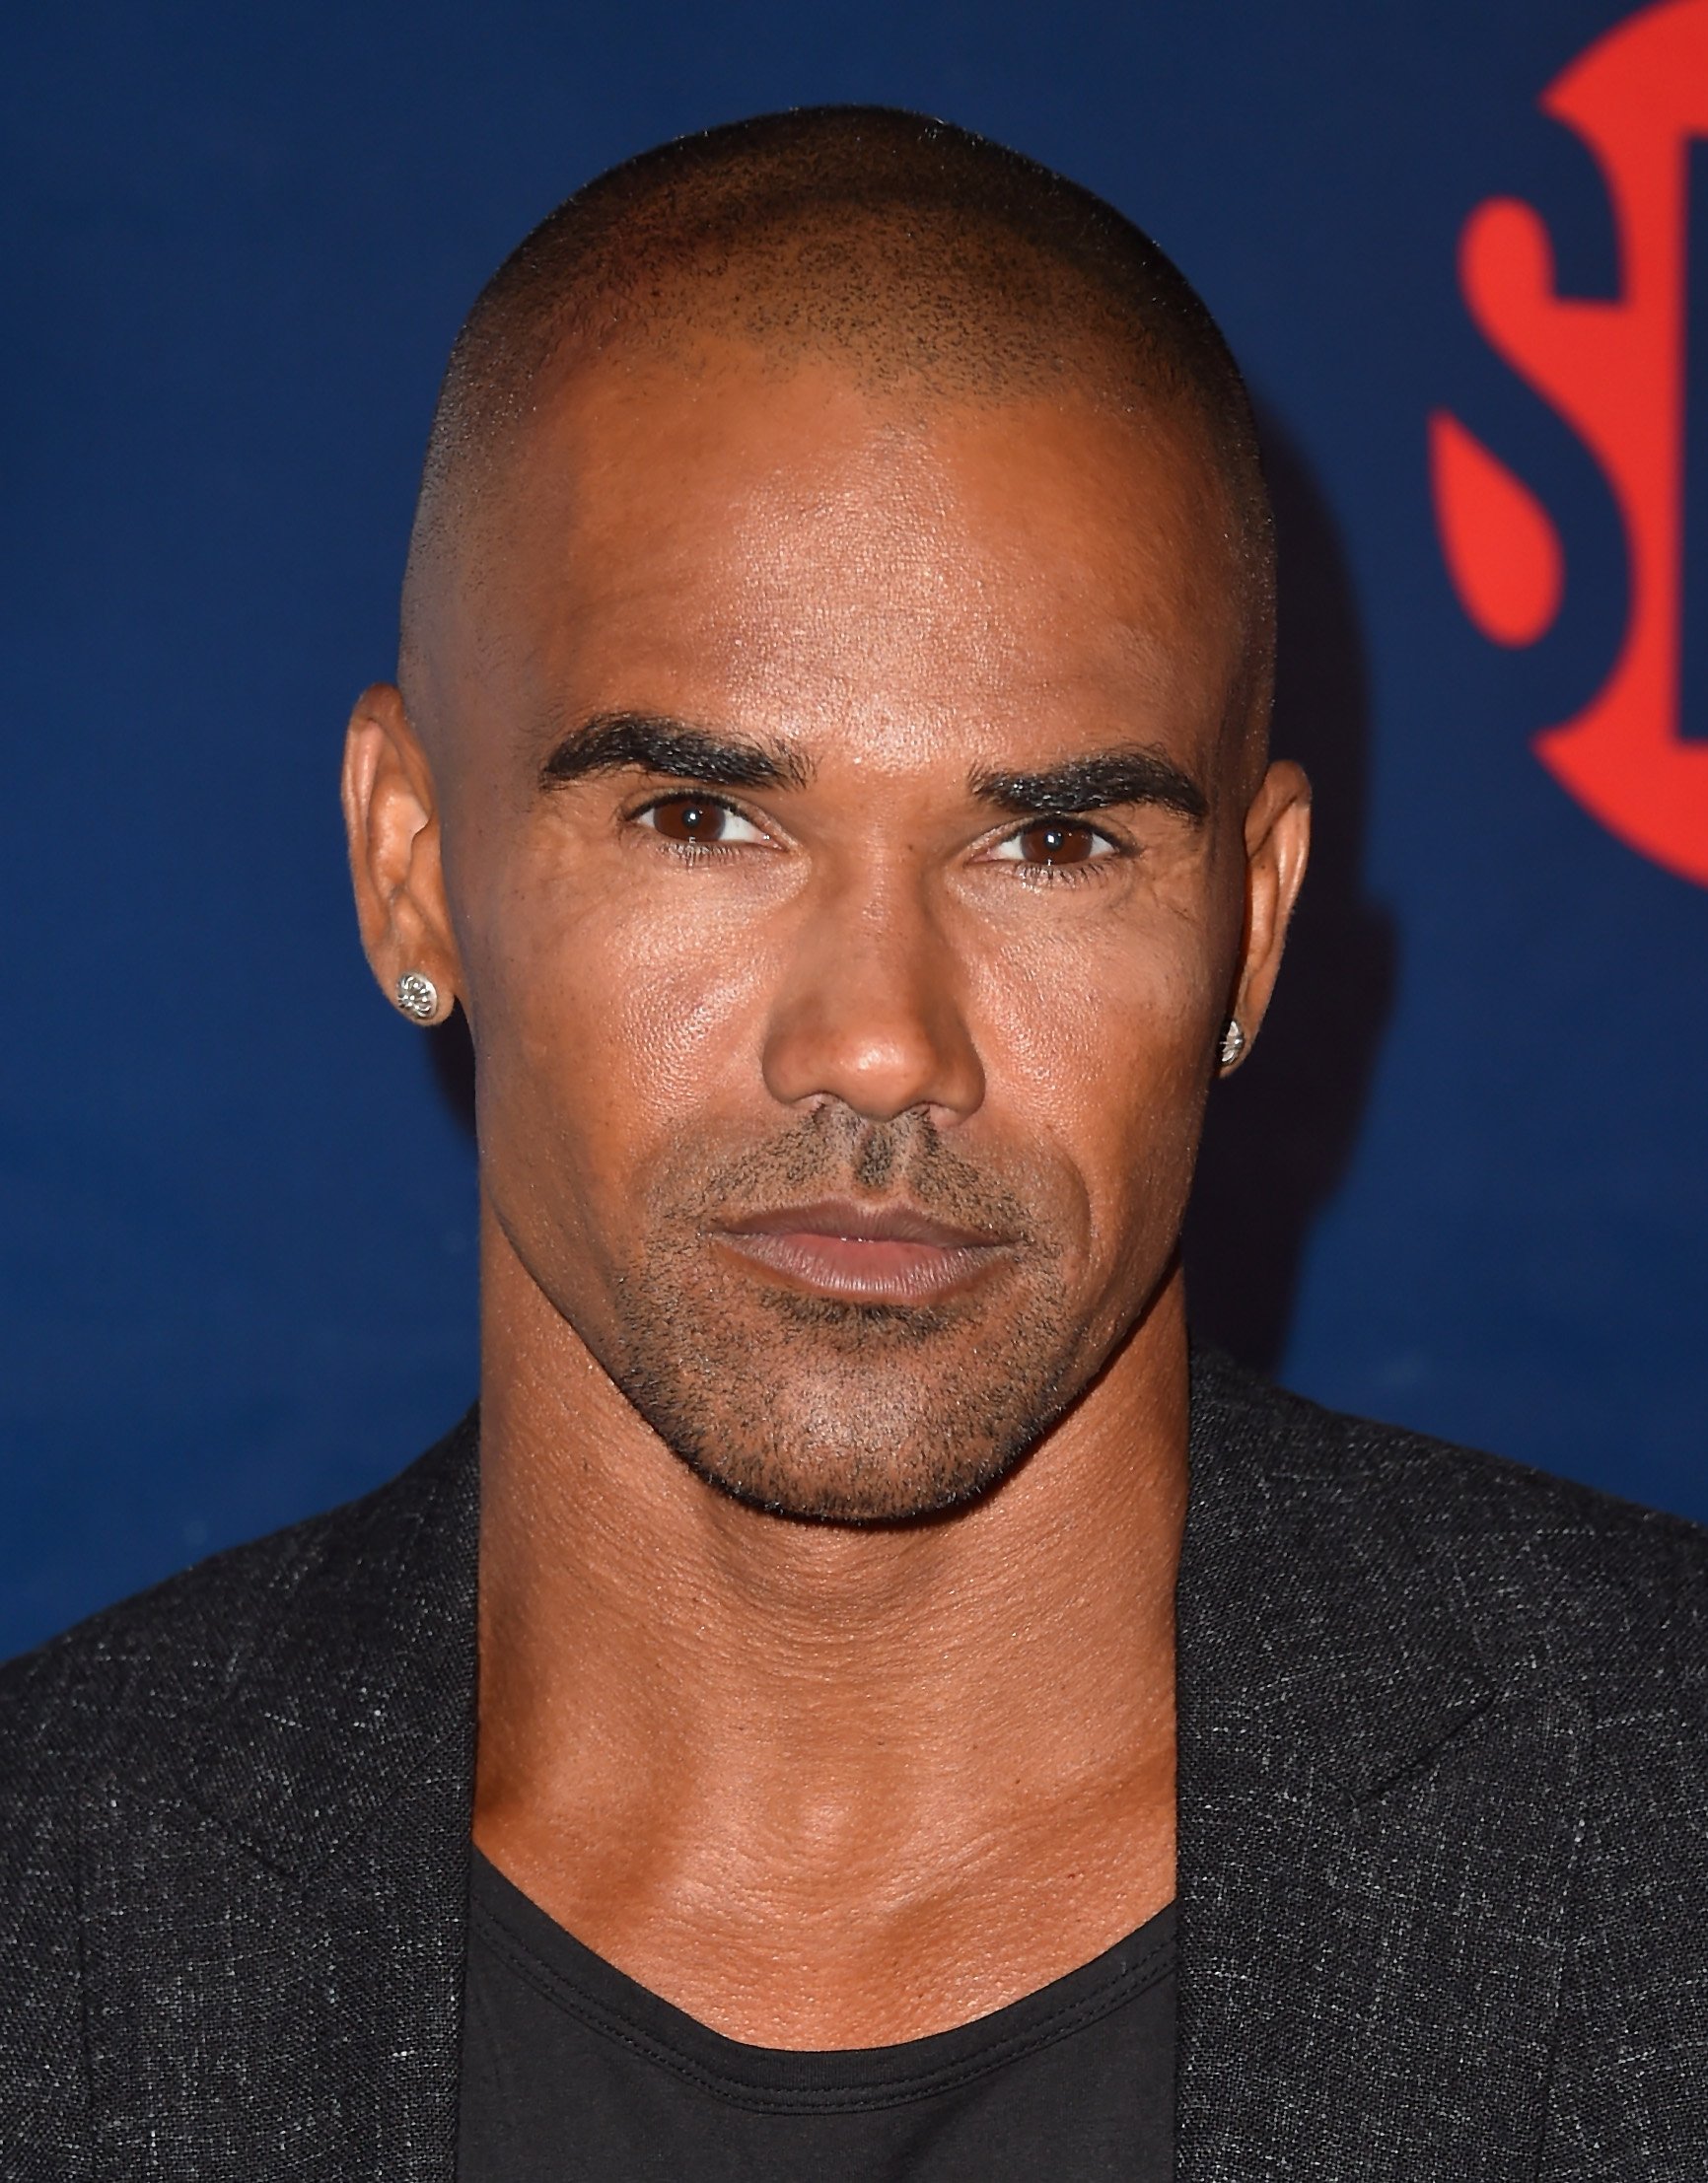 Shemar Moore during CBS' 2015 Summer TCA party. | Source: Getty Images